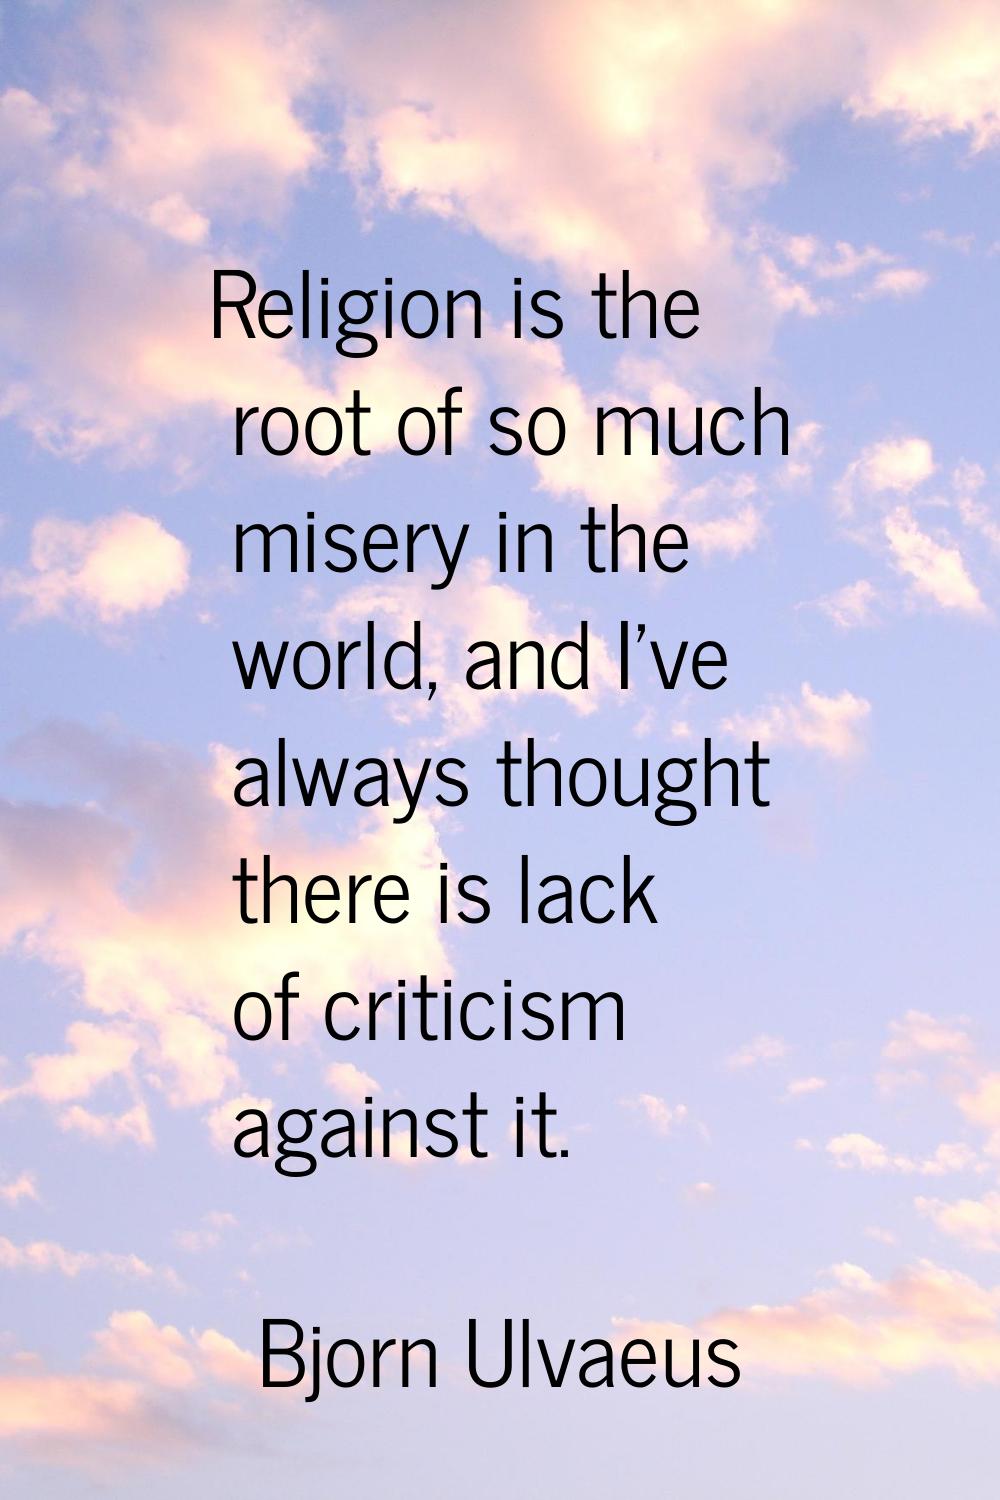 Religion is the root of so much misery in the world, and I've always thought there is lack of criti